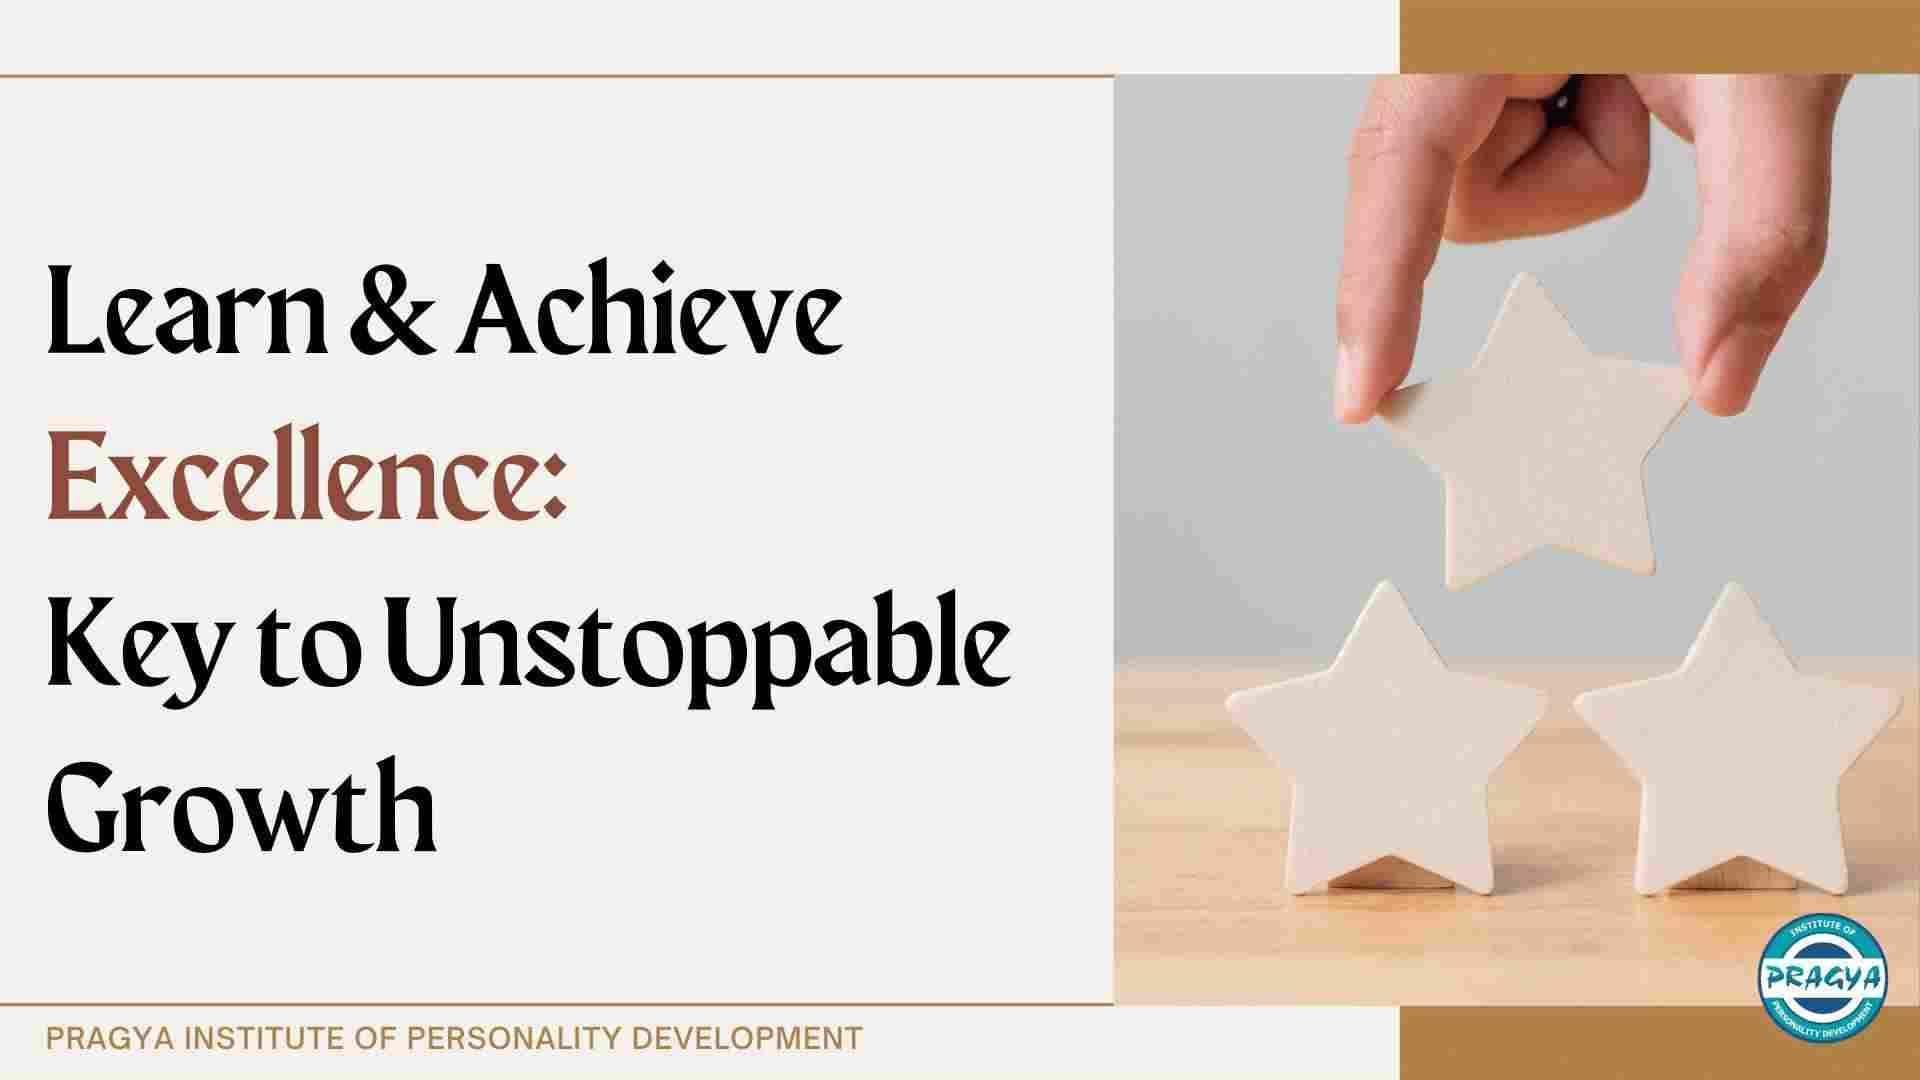 Learn & Achieve Excellence: Key to Unstoppable Growth